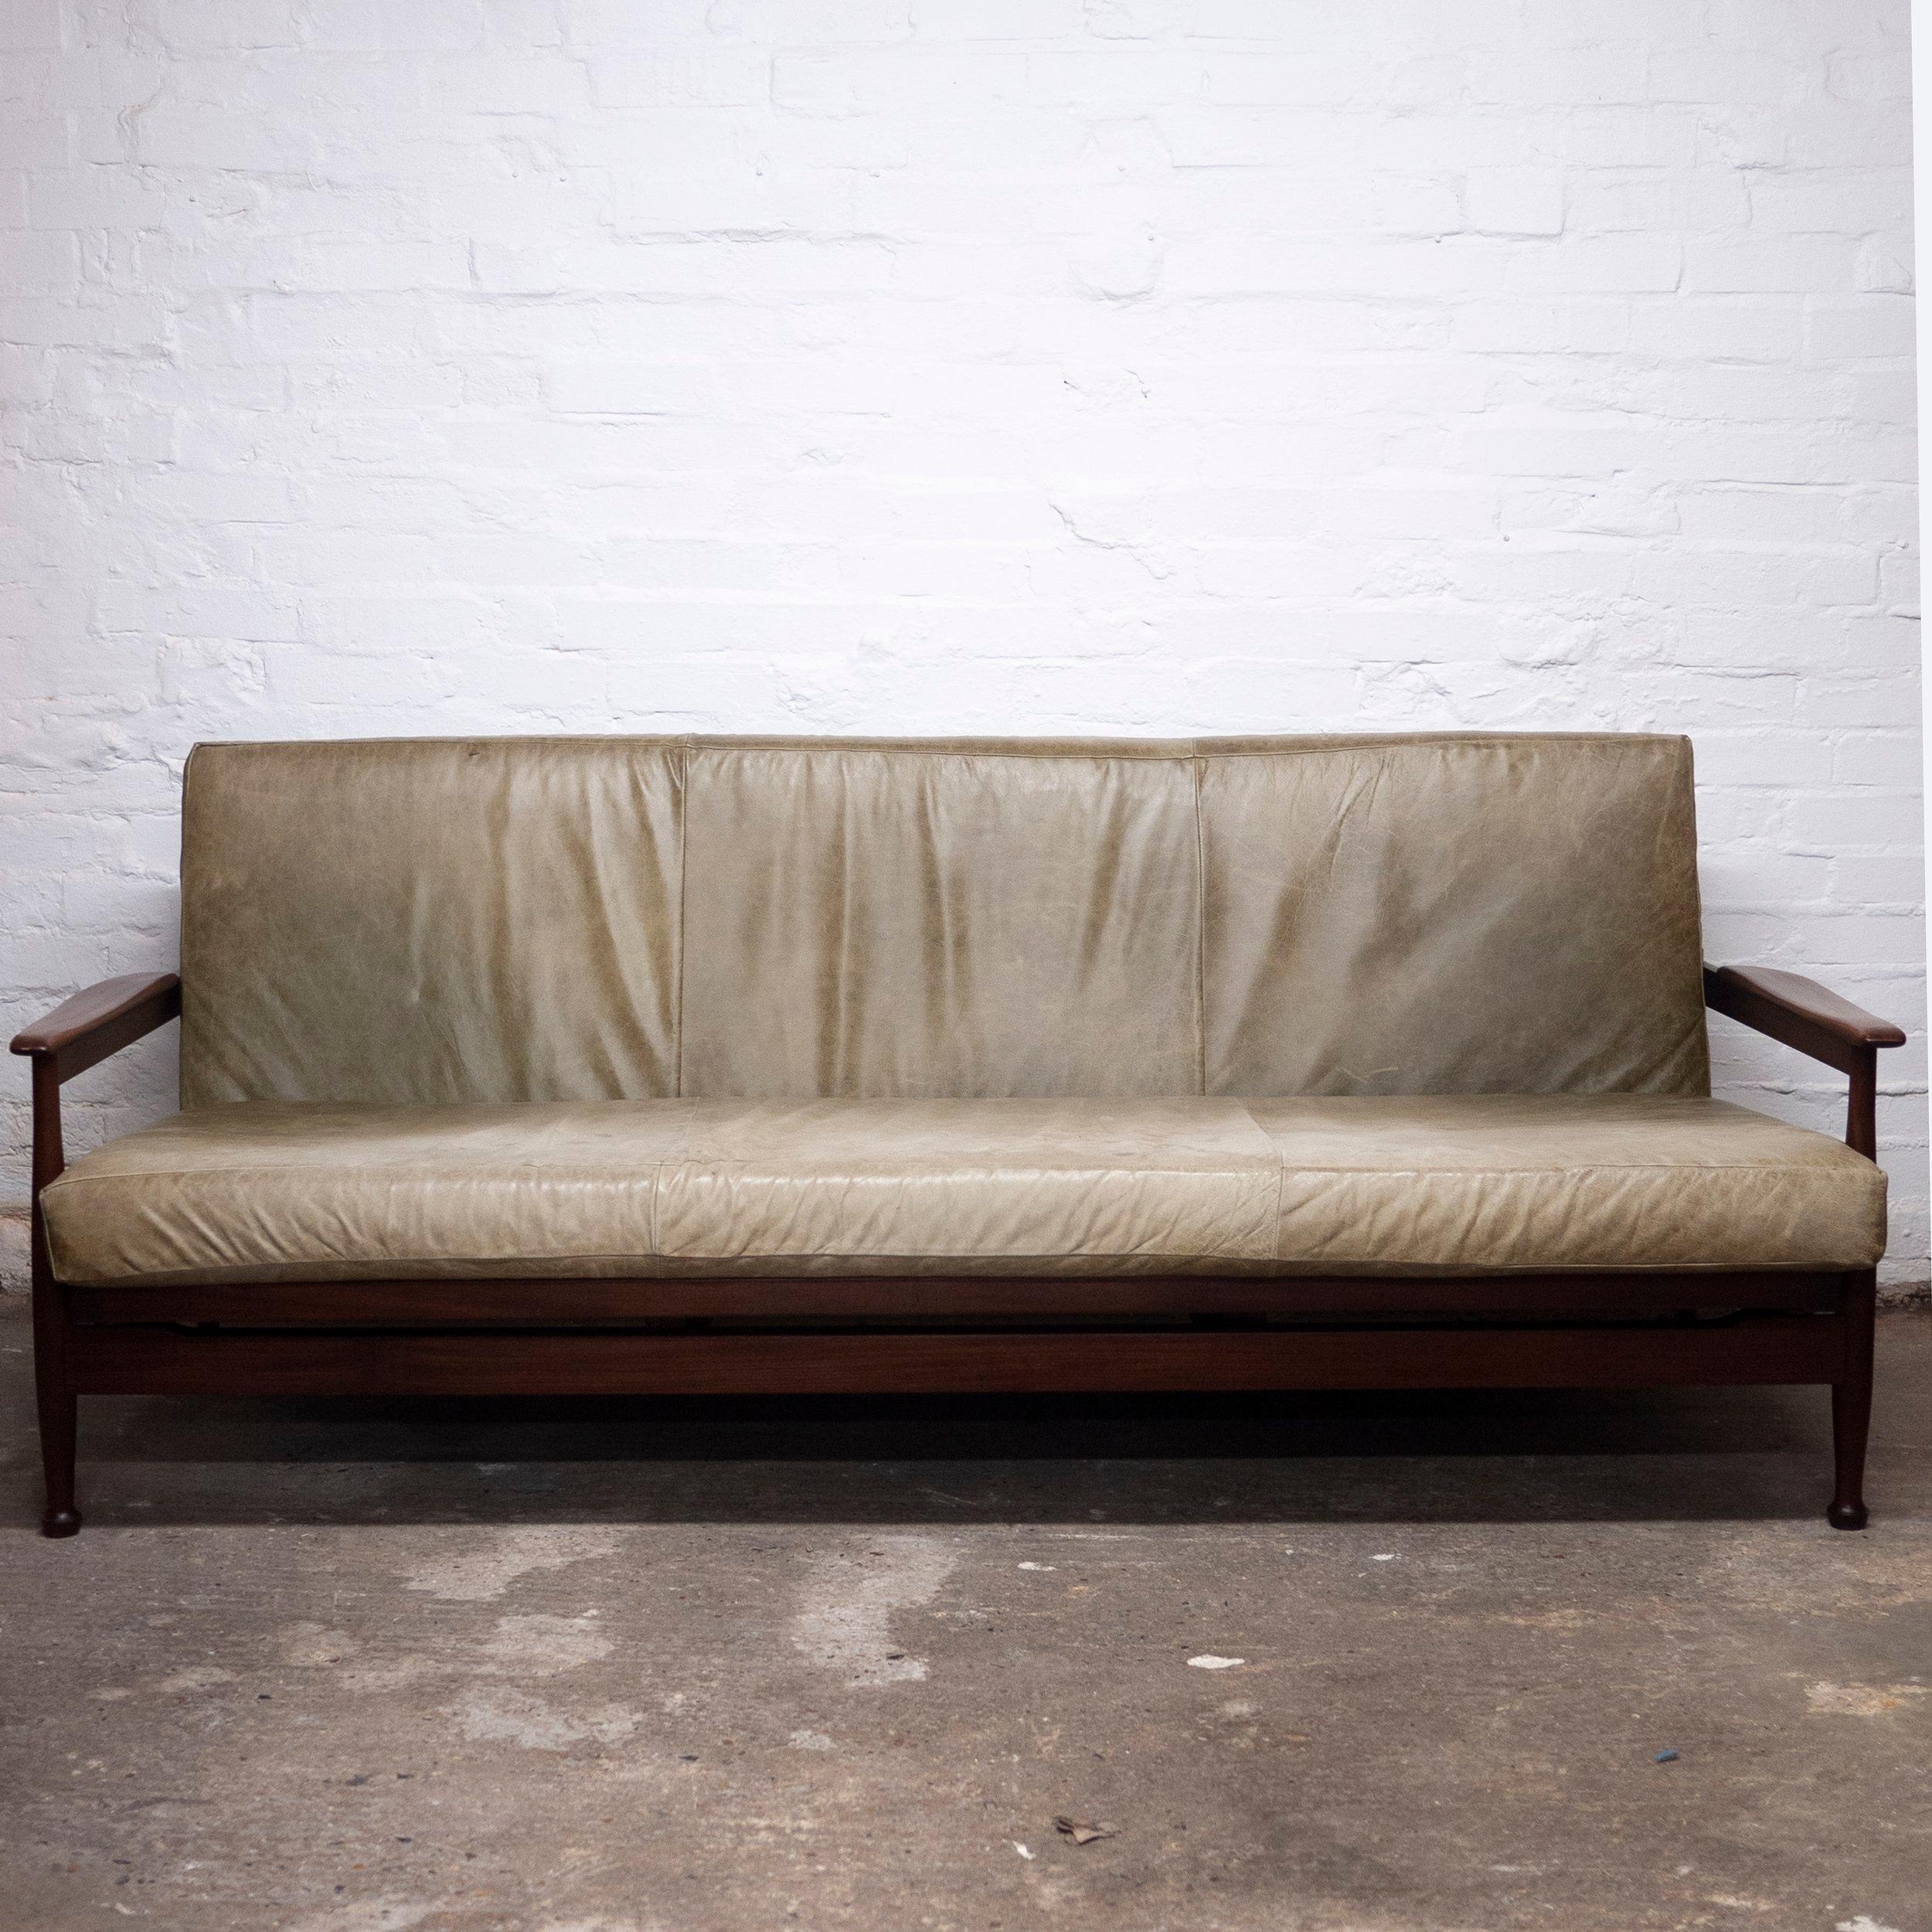 Manhattan Afromosia and Green Leather Sofa Bed by Guy Rogers, 1960s In Good Condition For Sale In Chesham, GB